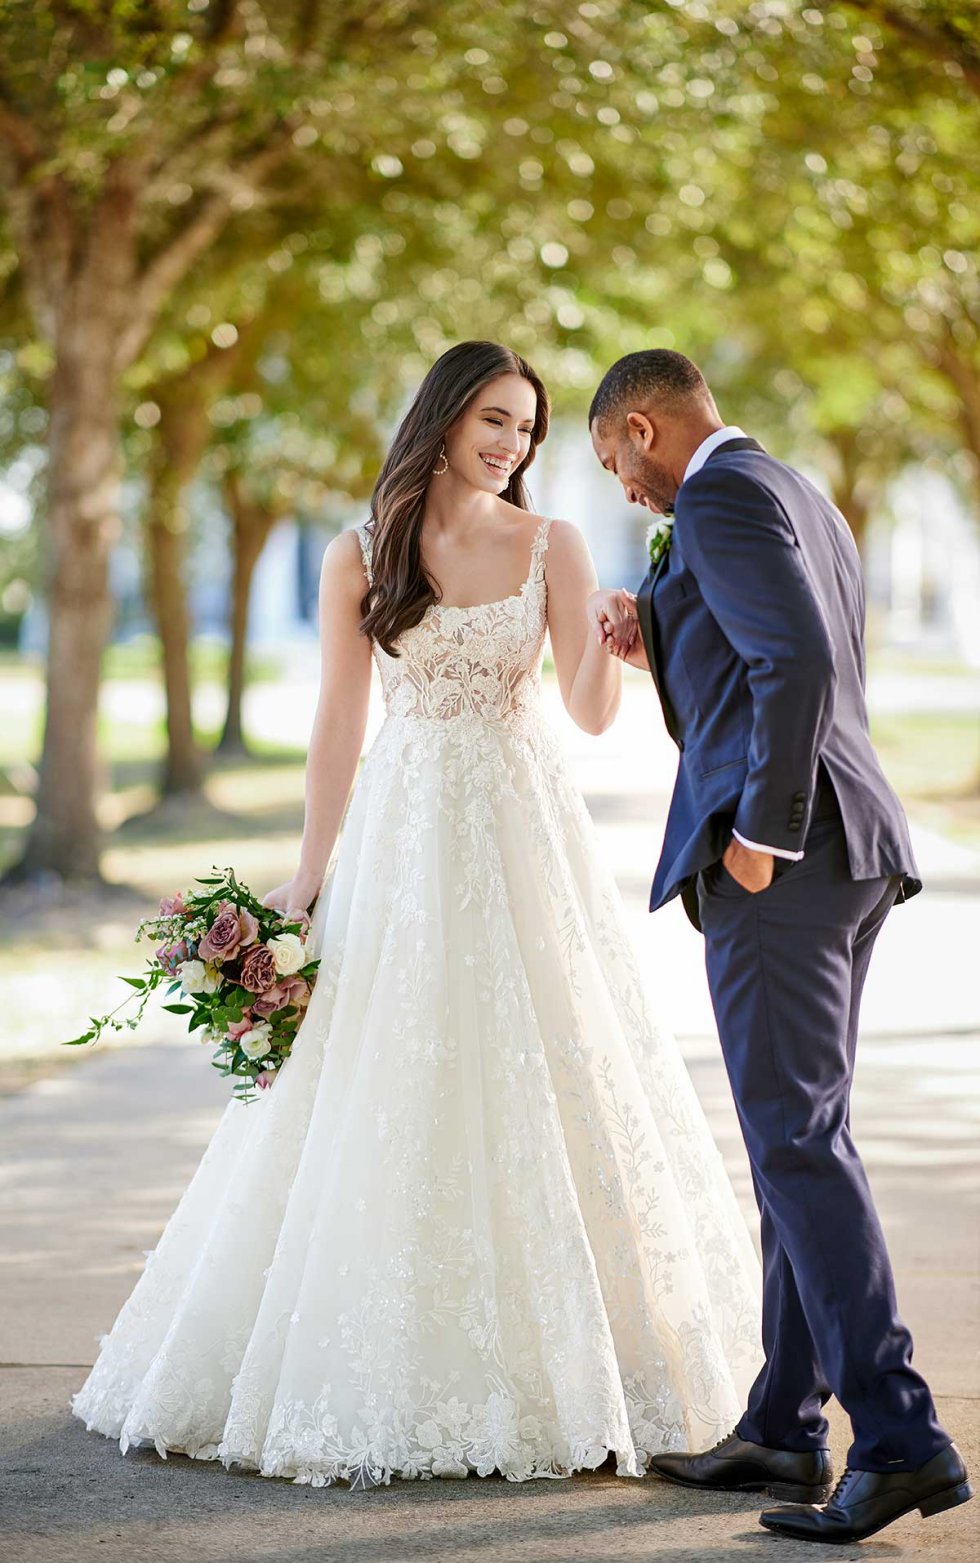 Stunning Lace Wedding Dress with Tulle Skirt Designer dress for less